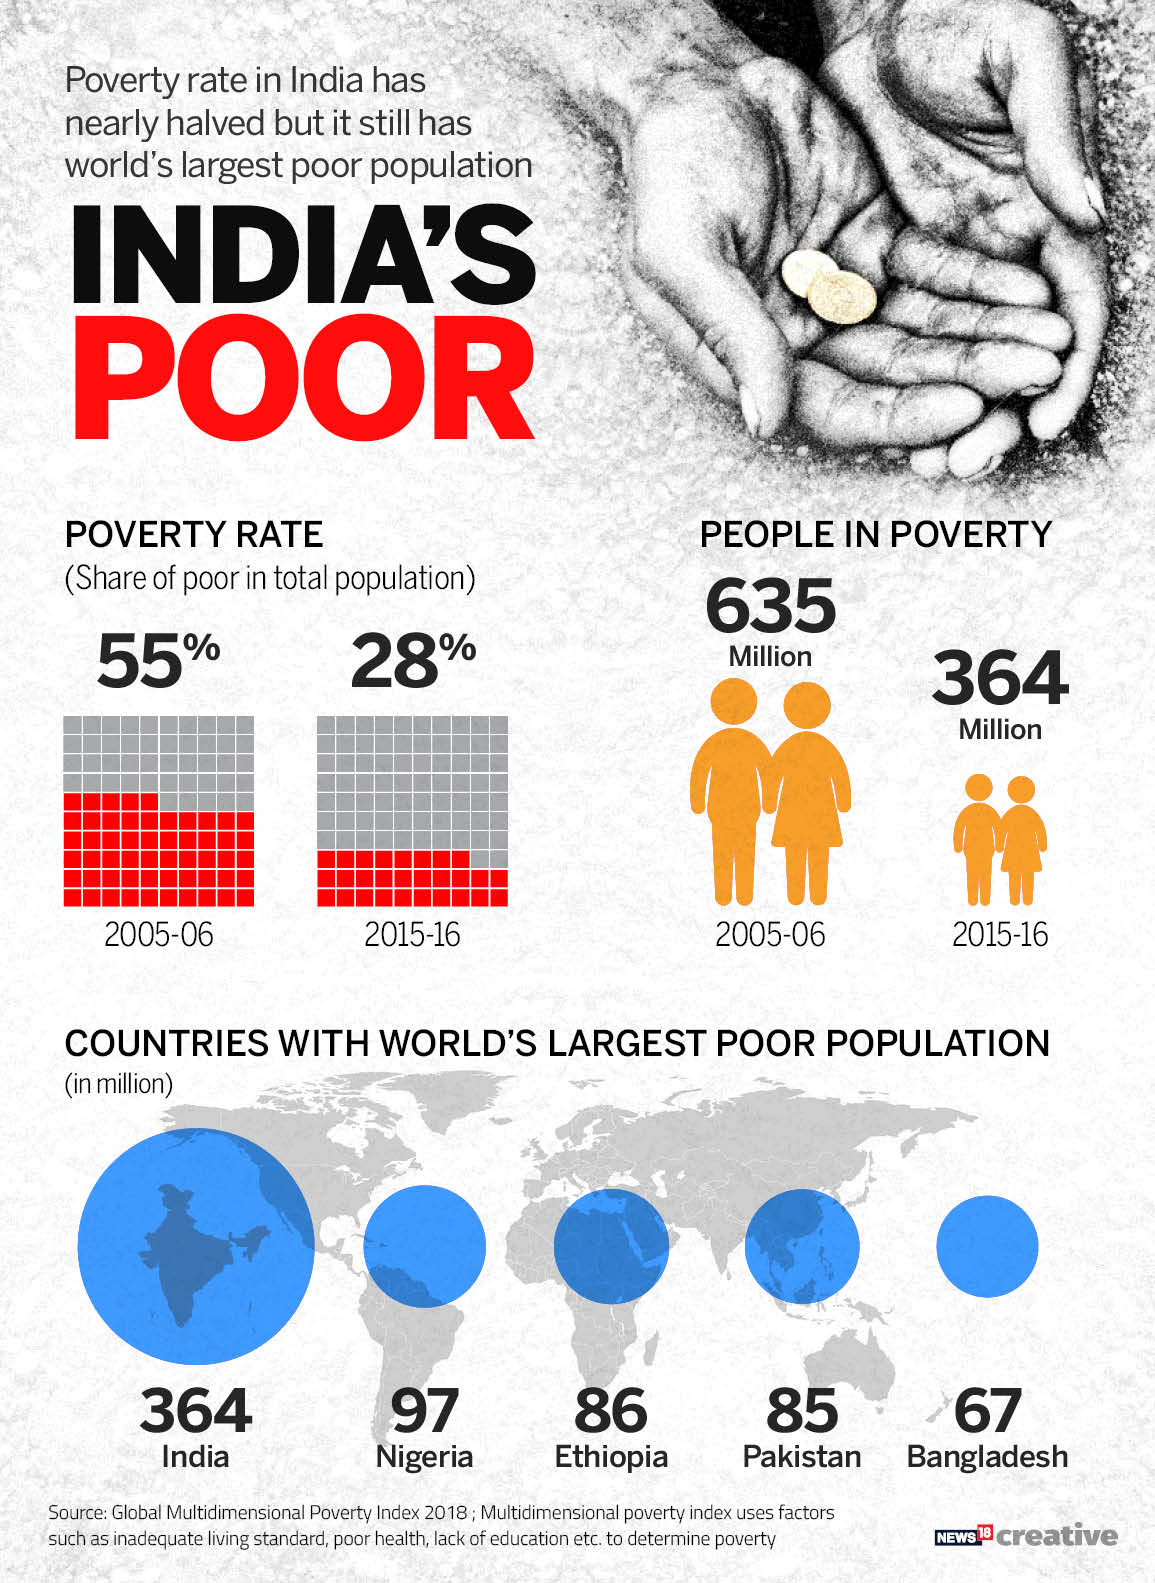 Poverty Reduction Rate Fastest Among Scheduled Tribes and Muslims in